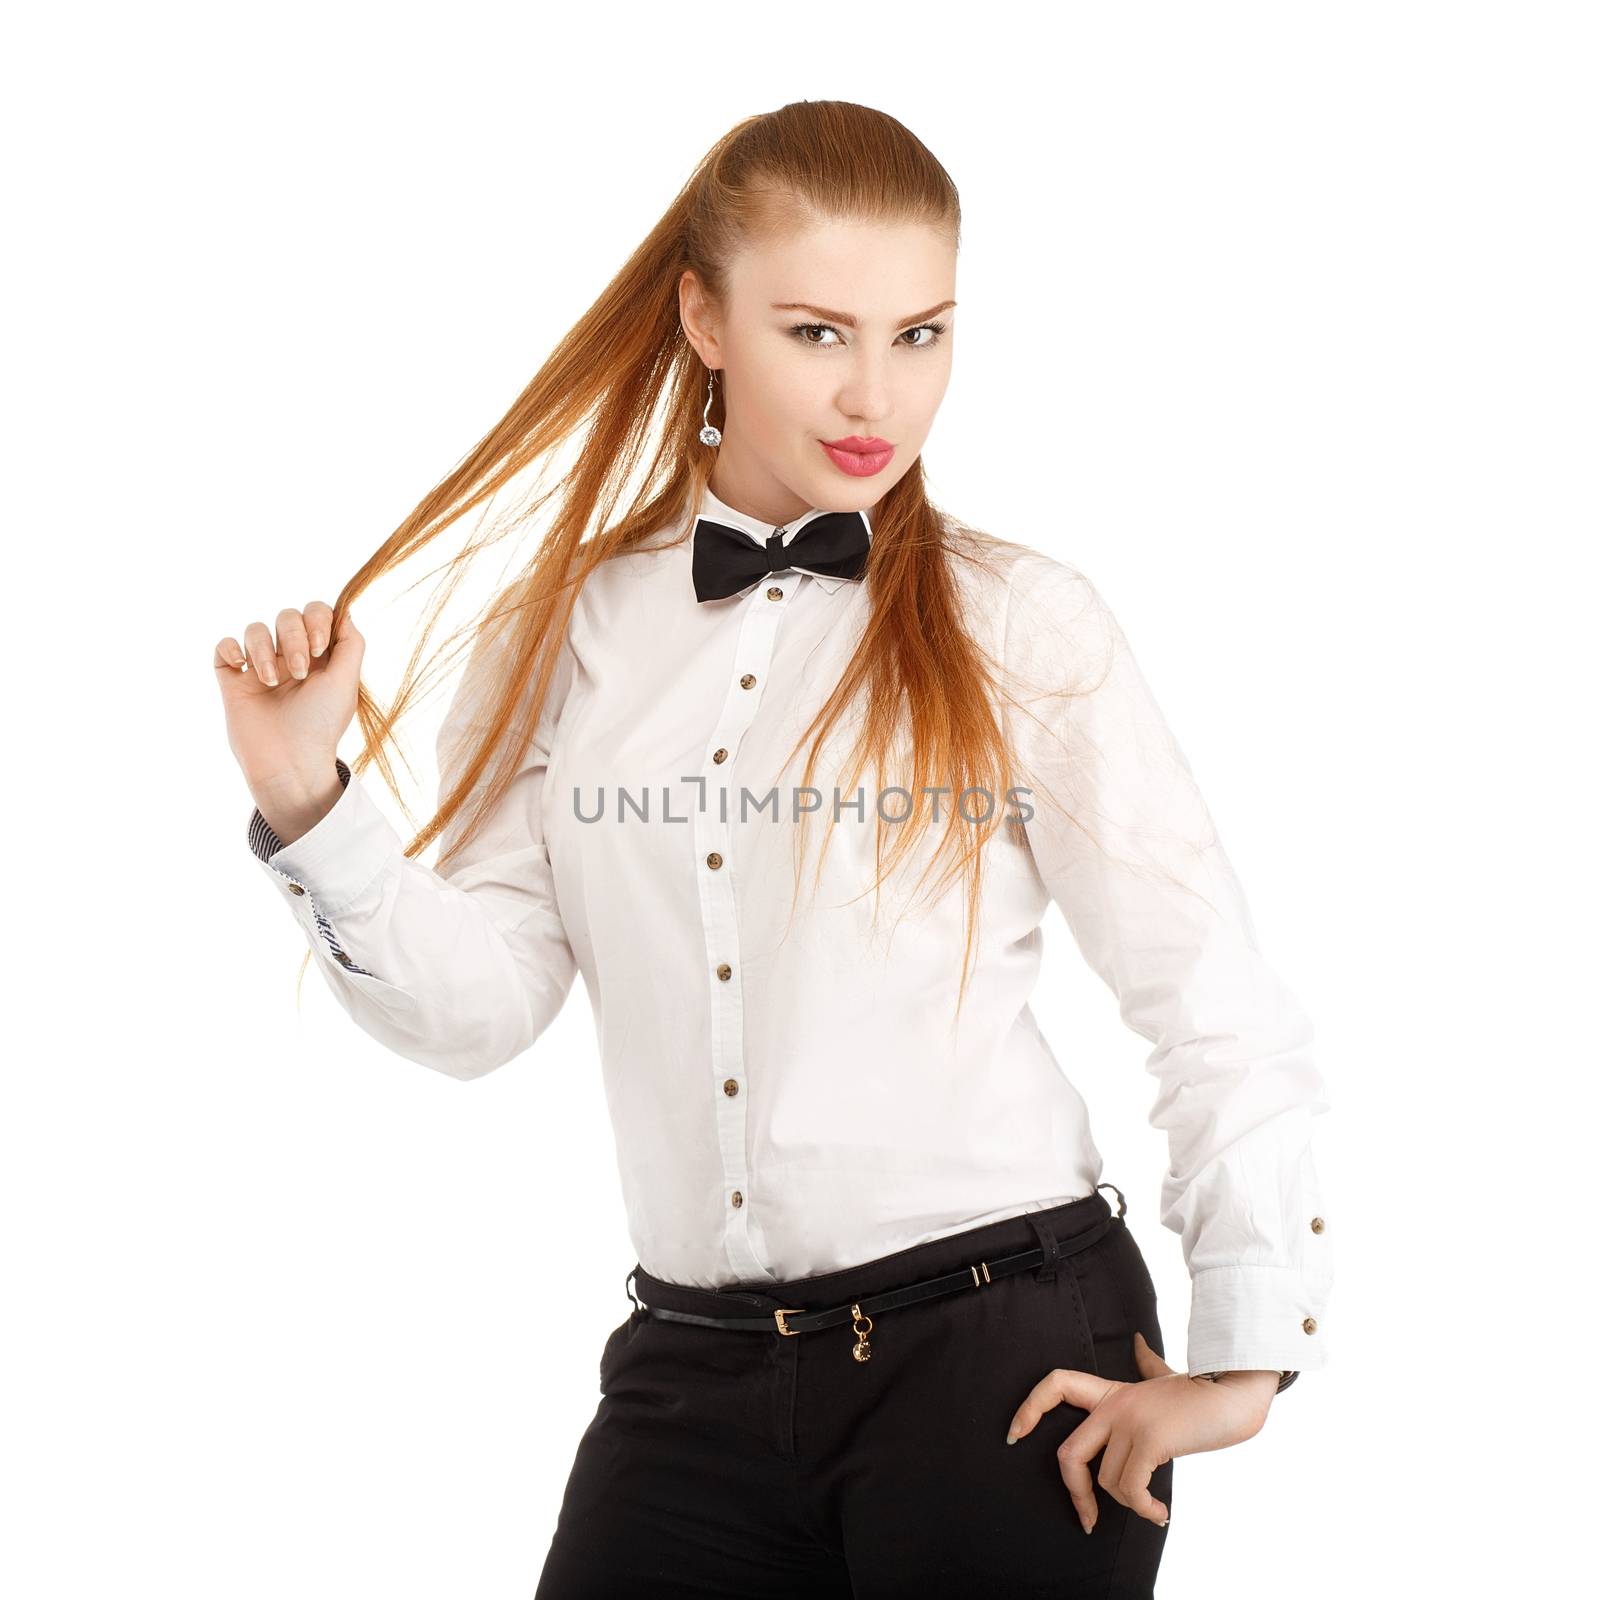 Portrait of beautiful young woman in strict clothing with bow tie isolated on white background